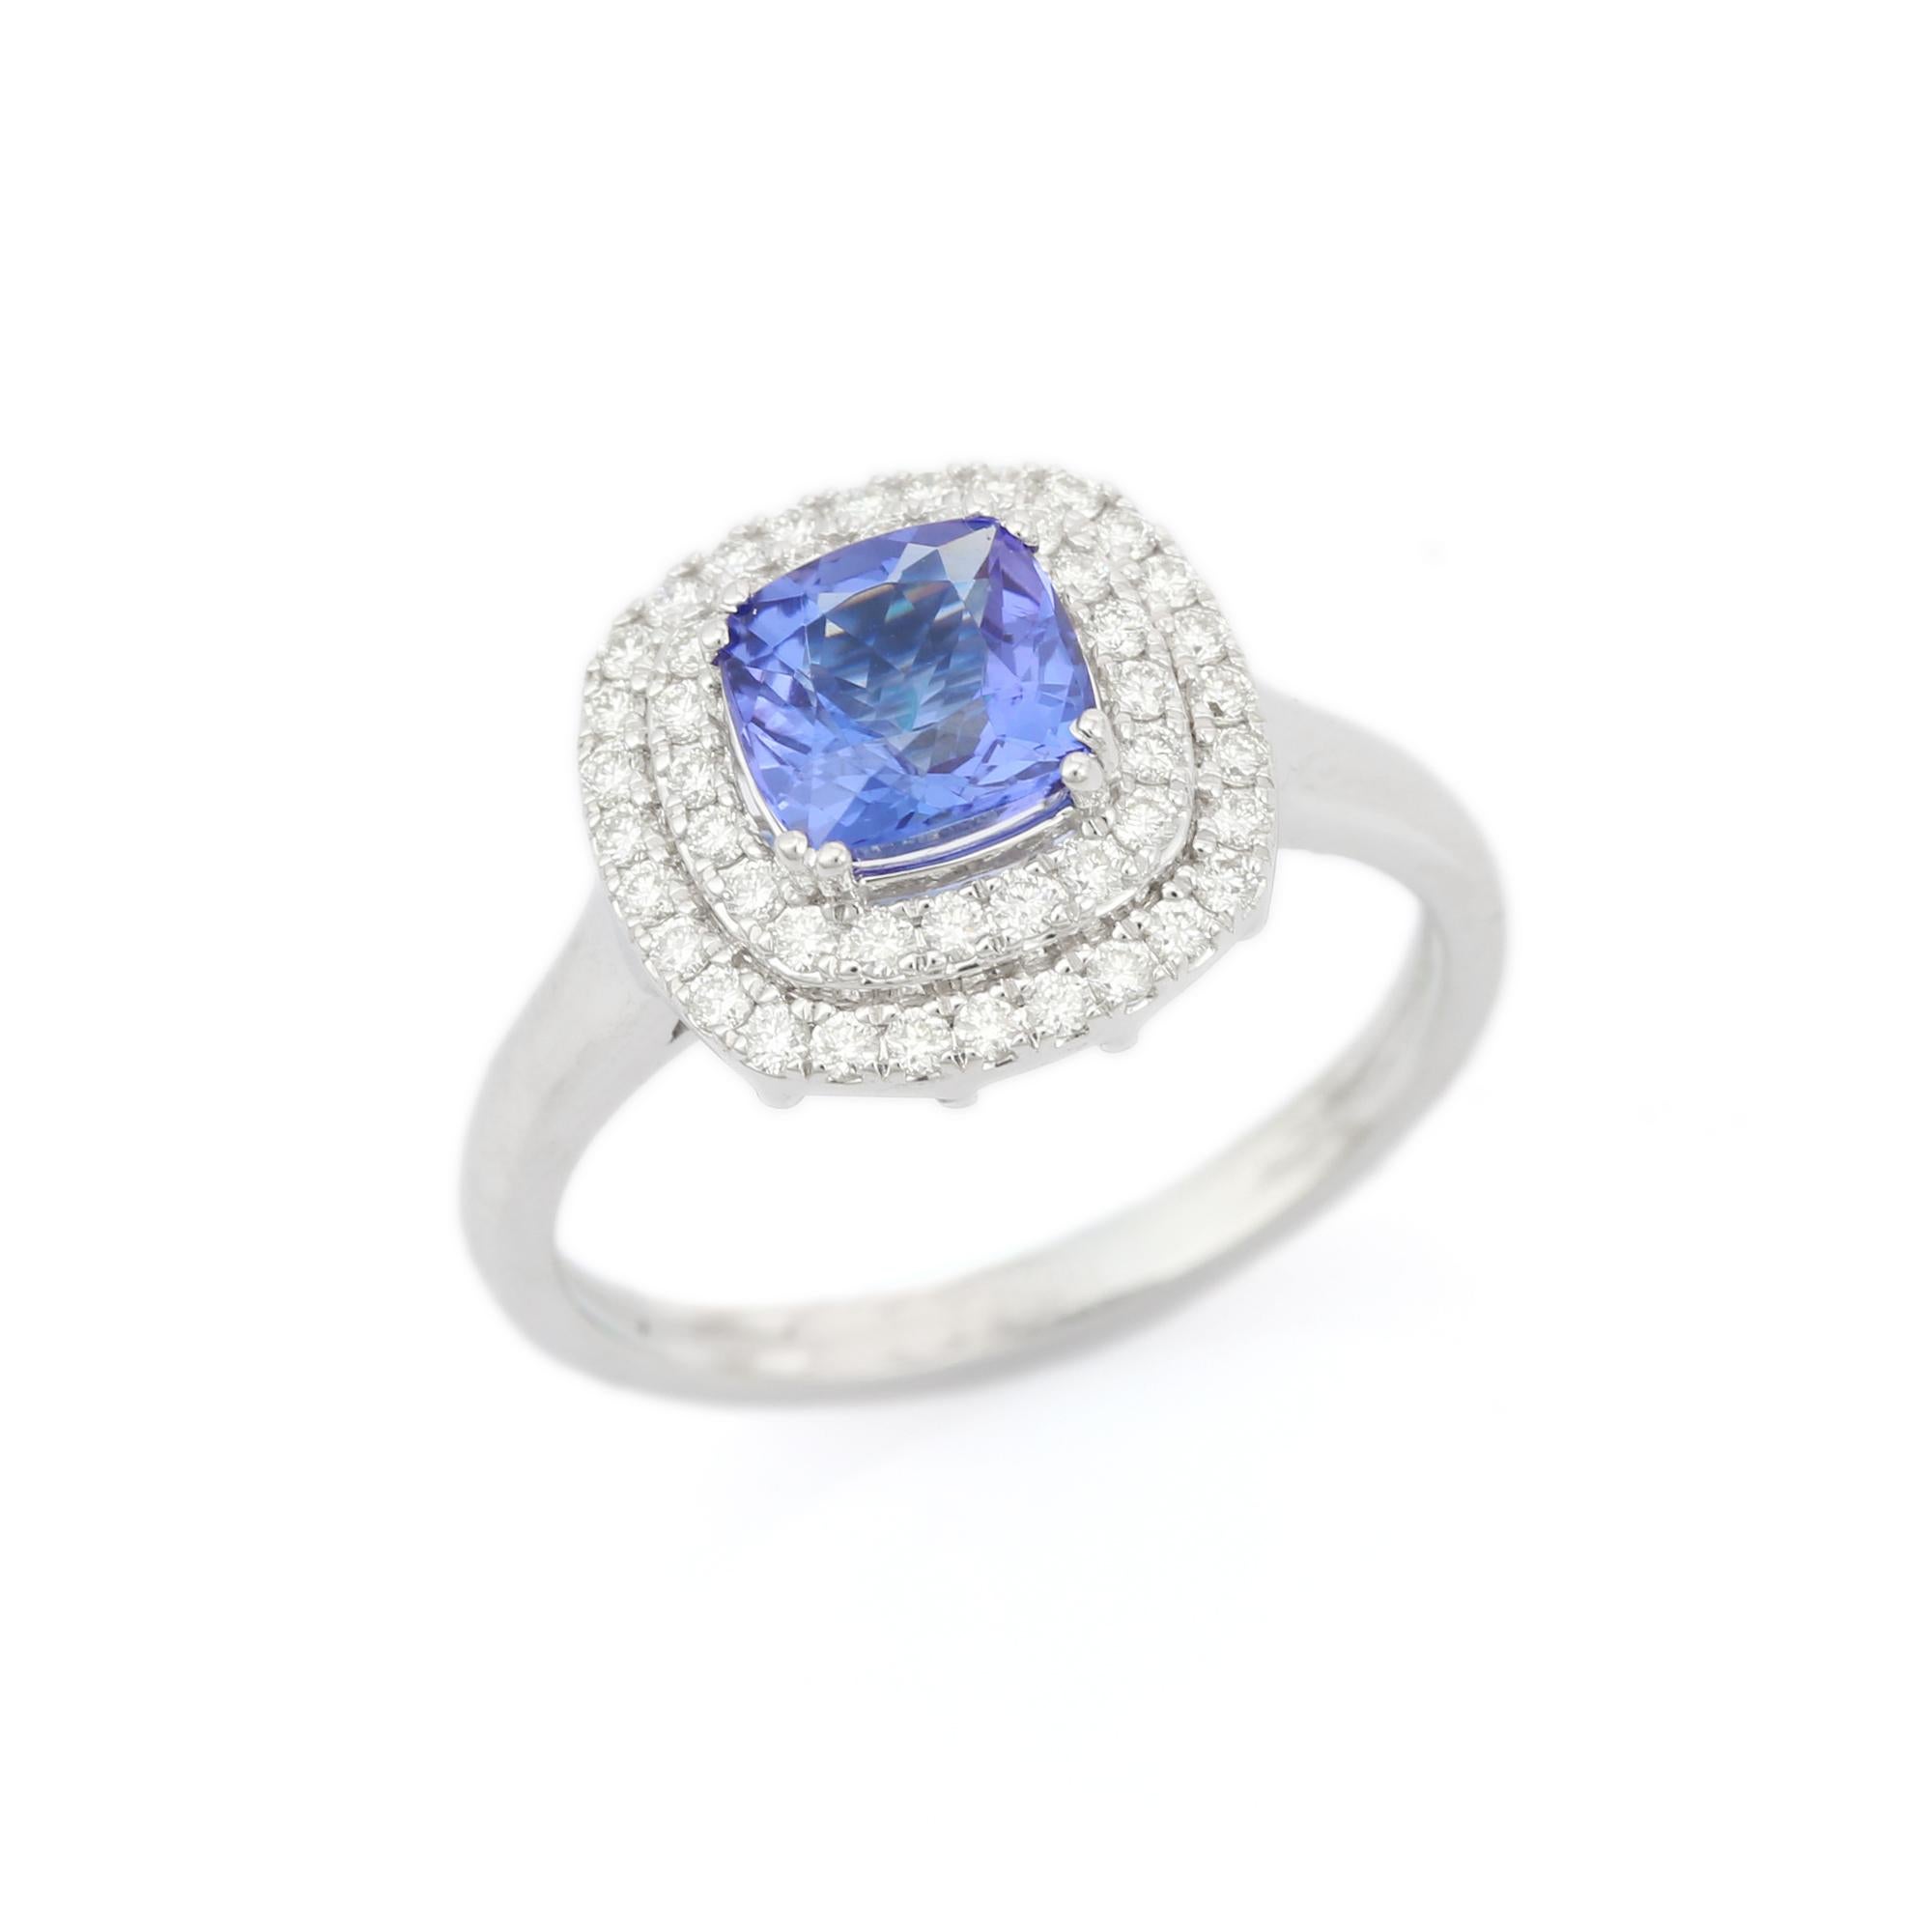 For Sale:  18k Solid White Gold Cushion Cut 1.2 Ct Tanzanite Diamond Ring for Women 4